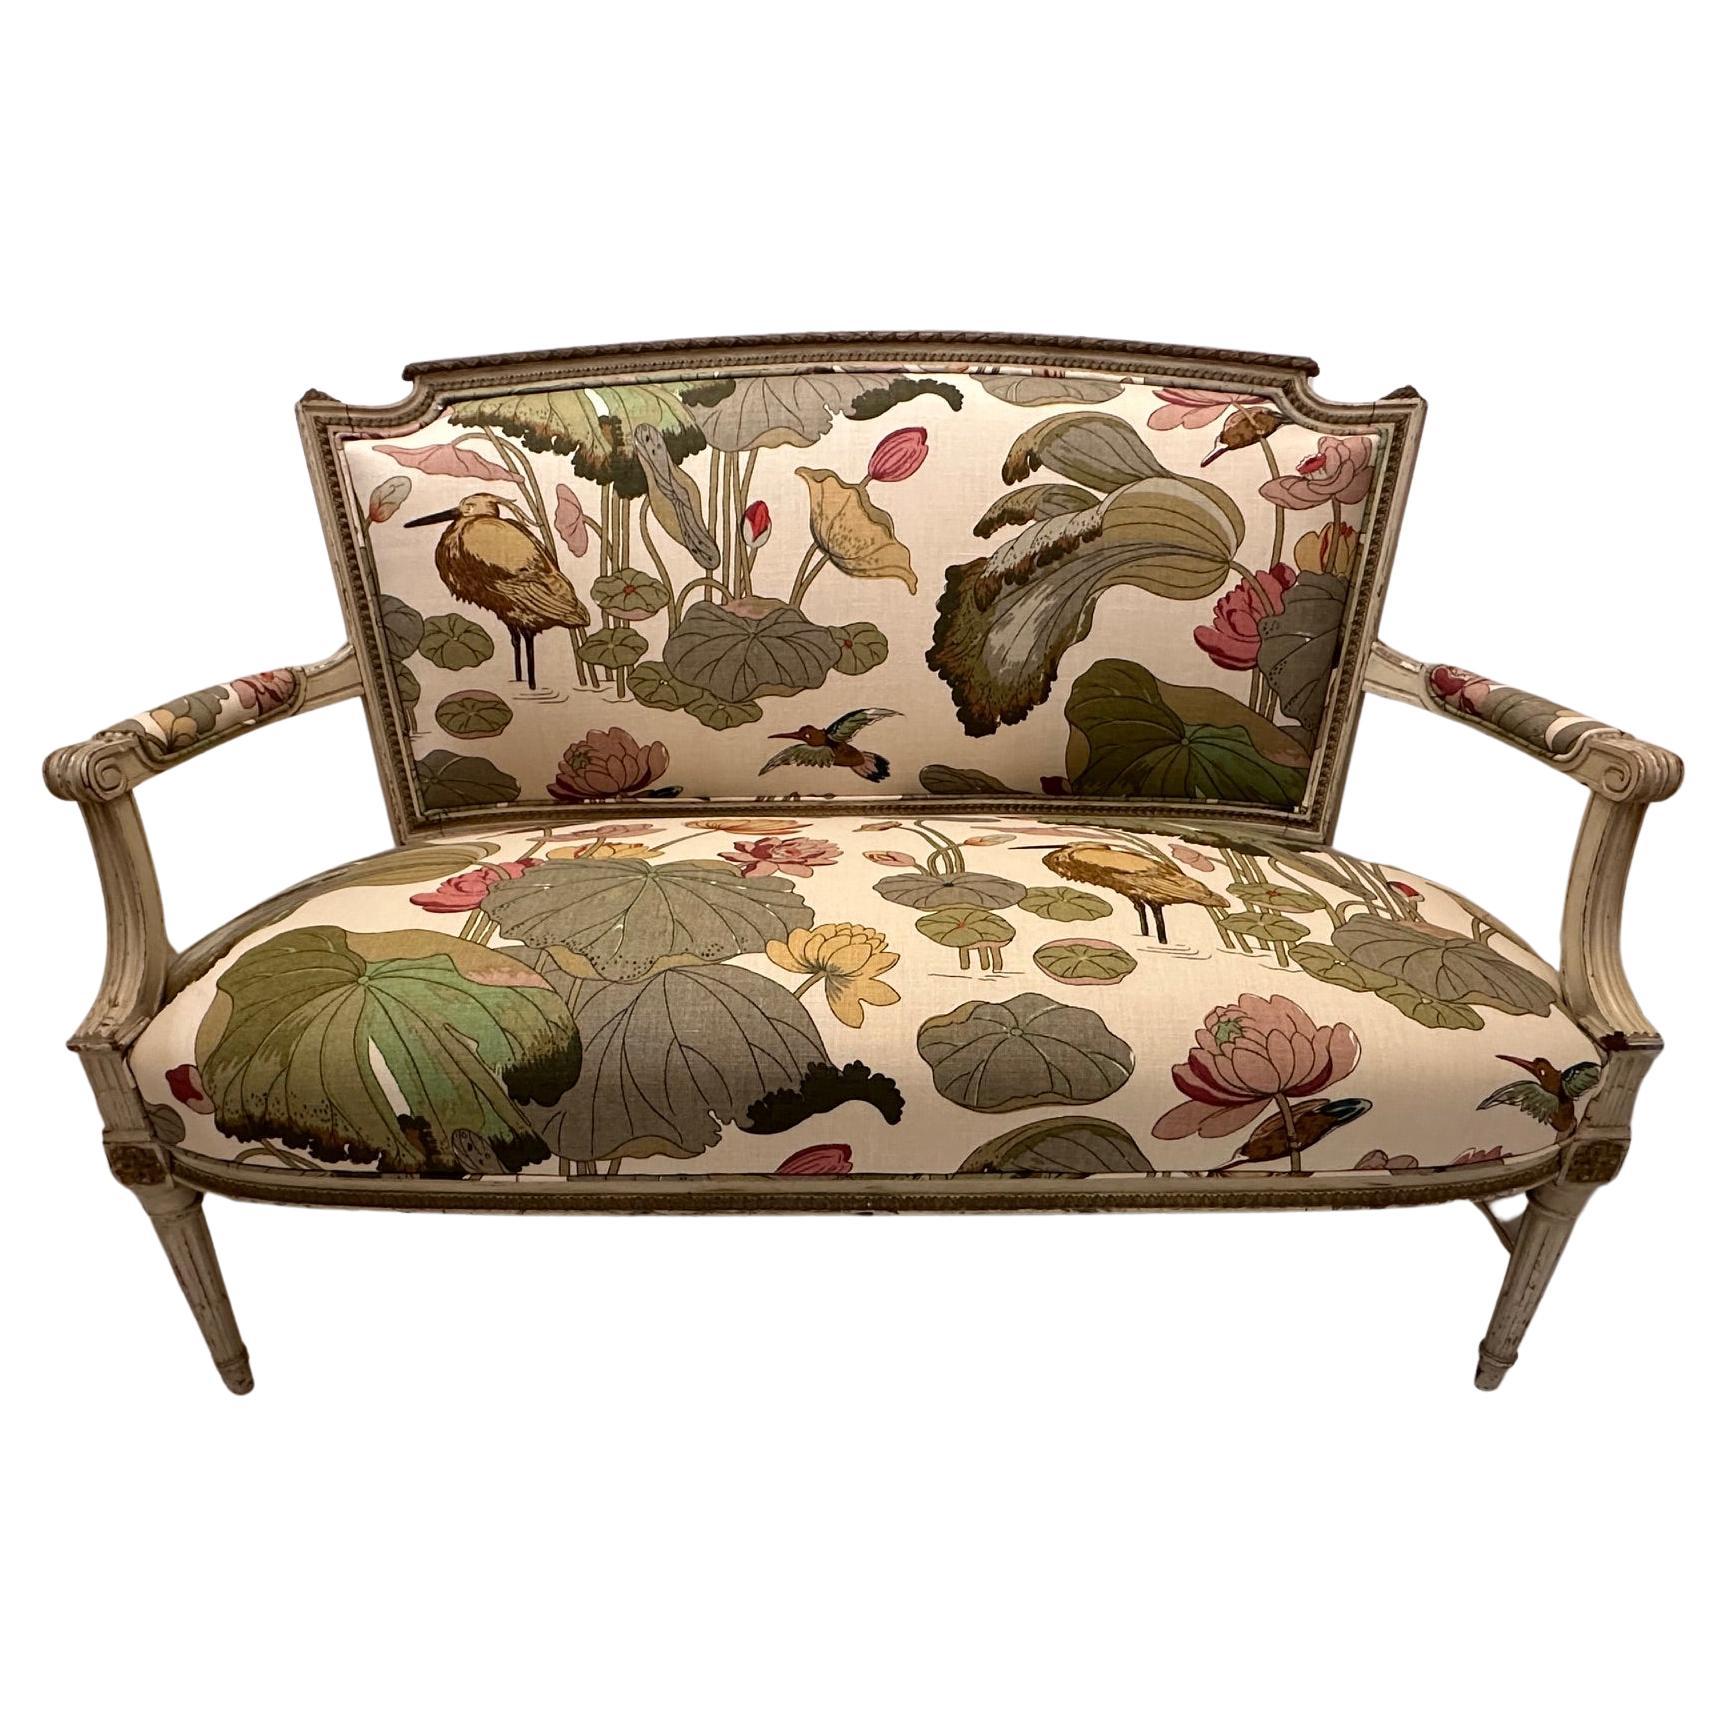 Newly Upholstered Vintage Painted Loveseat For Sale